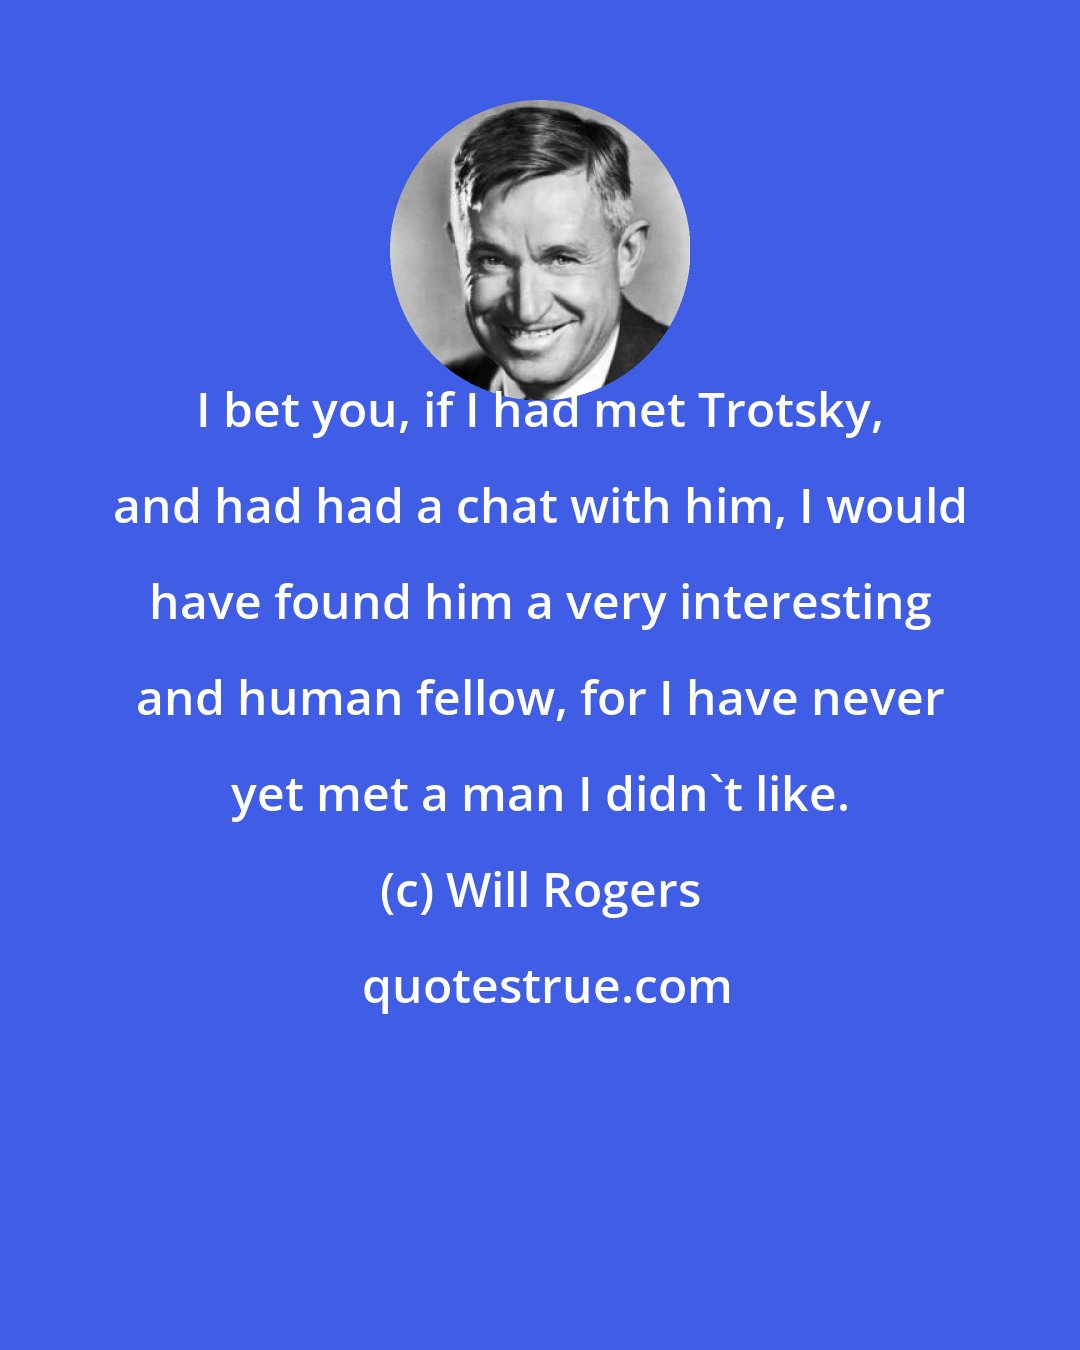 Will Rogers: I bet you, if I had met Trotsky, and had had a chat with him, I would have found him a very interesting and human fellow, for I have never yet met a man I didn't like.